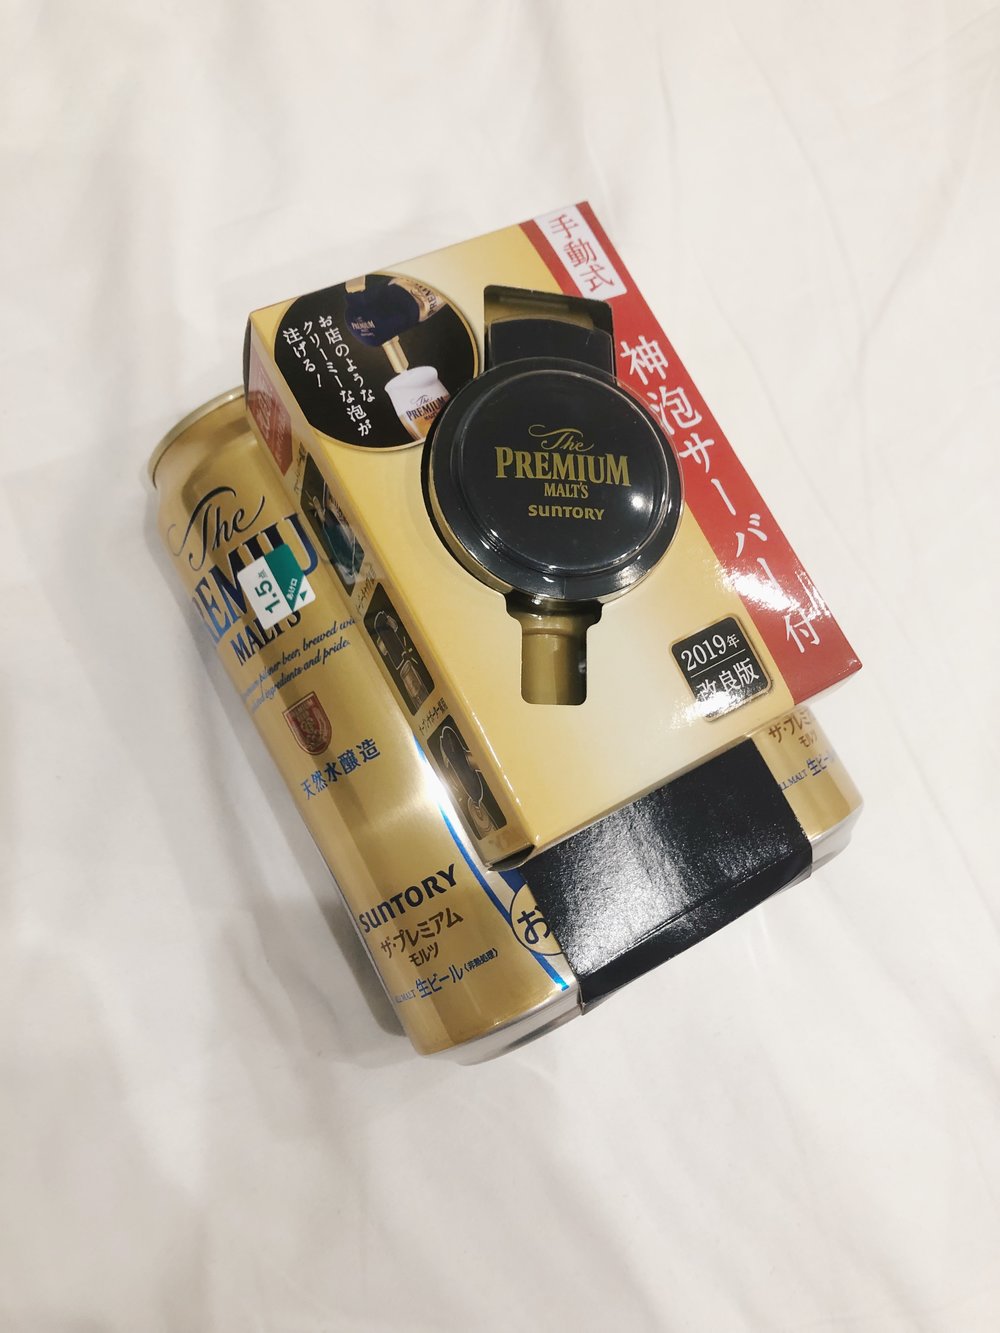 Suntory can tap promo gift.